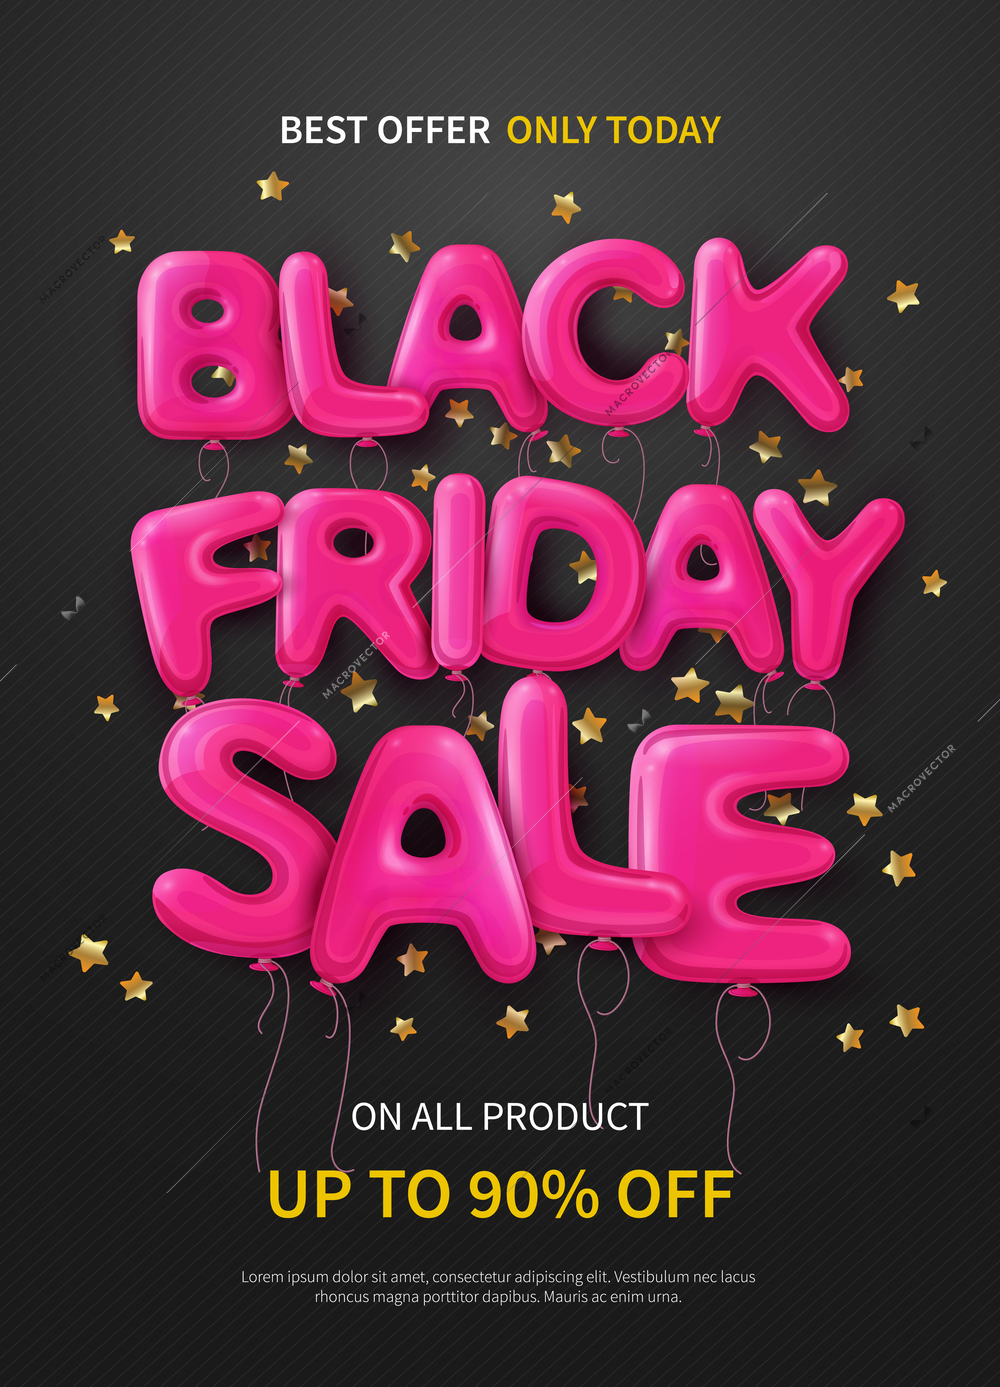 Dark poster with pink balloons forming text black friday sale flat vector illustration